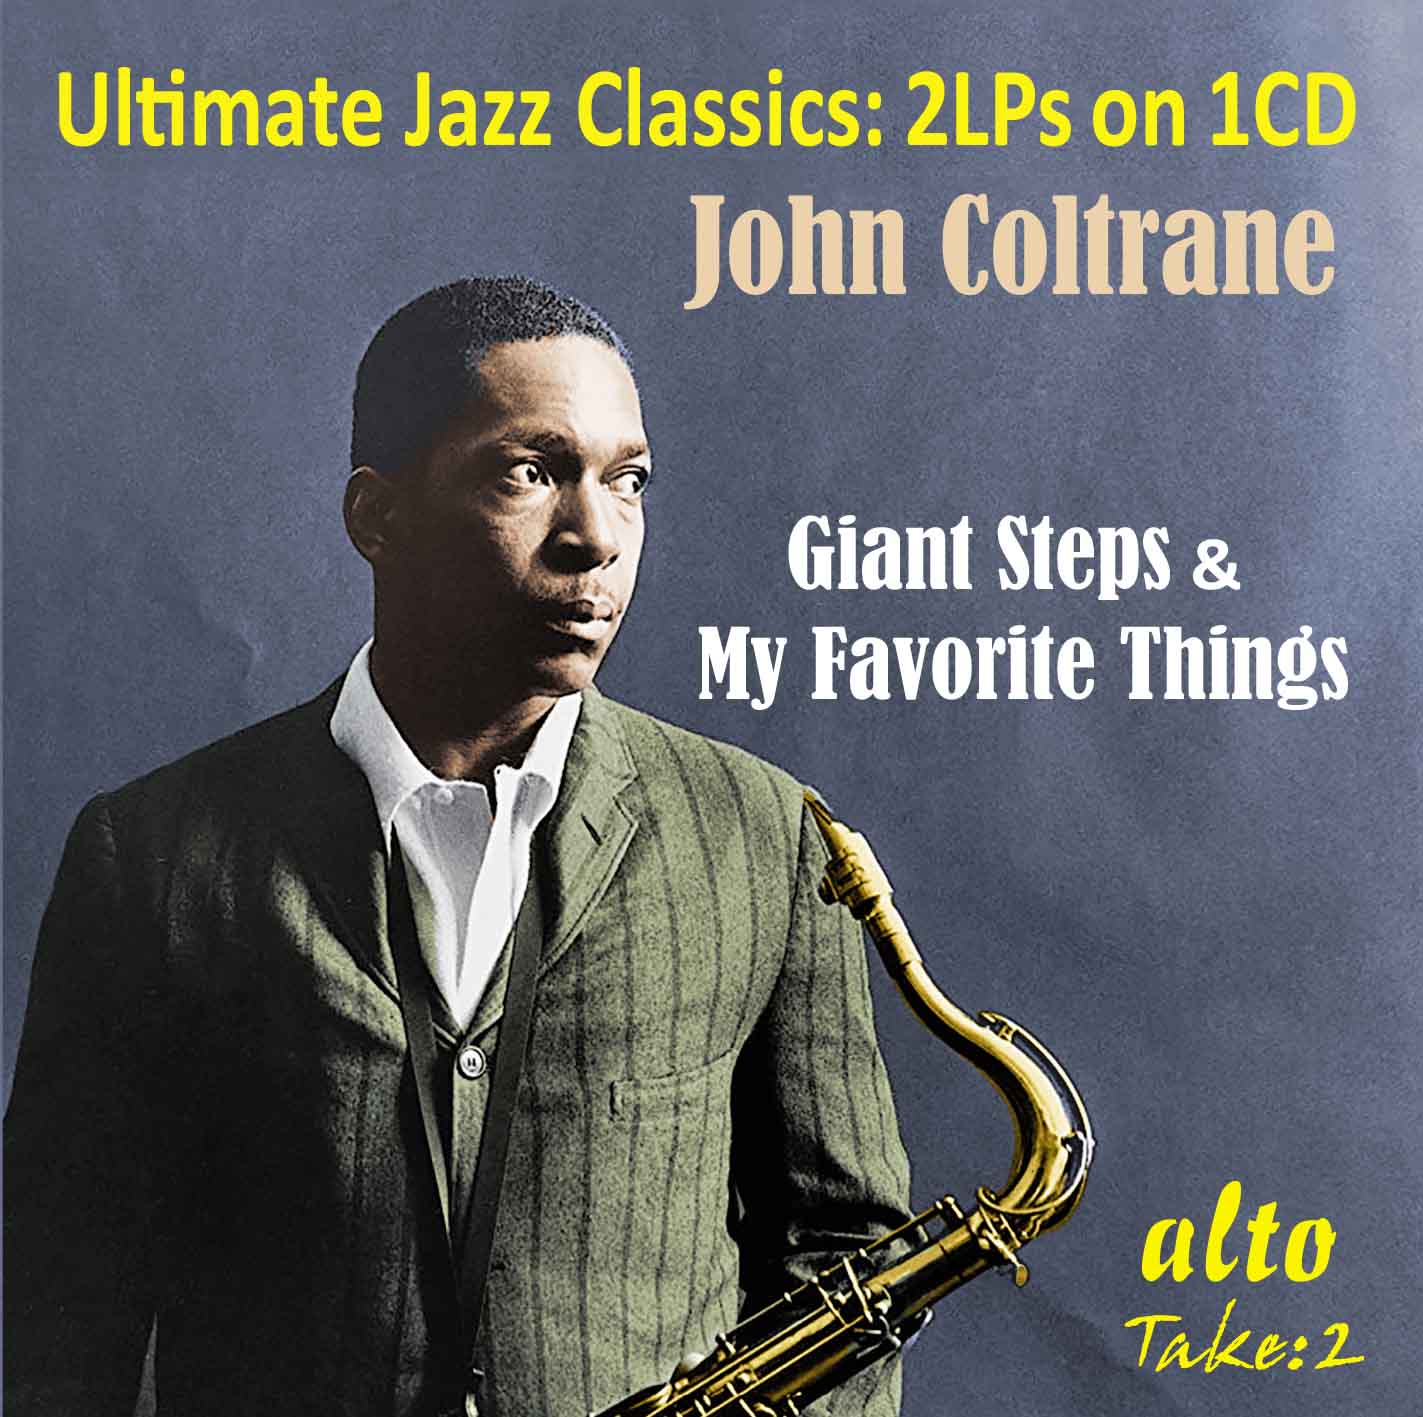 Giant　My　LPs　Coltrane:　(2　Things　Favorite　on　John　World　–　Steps　CD)　ClassicSelect